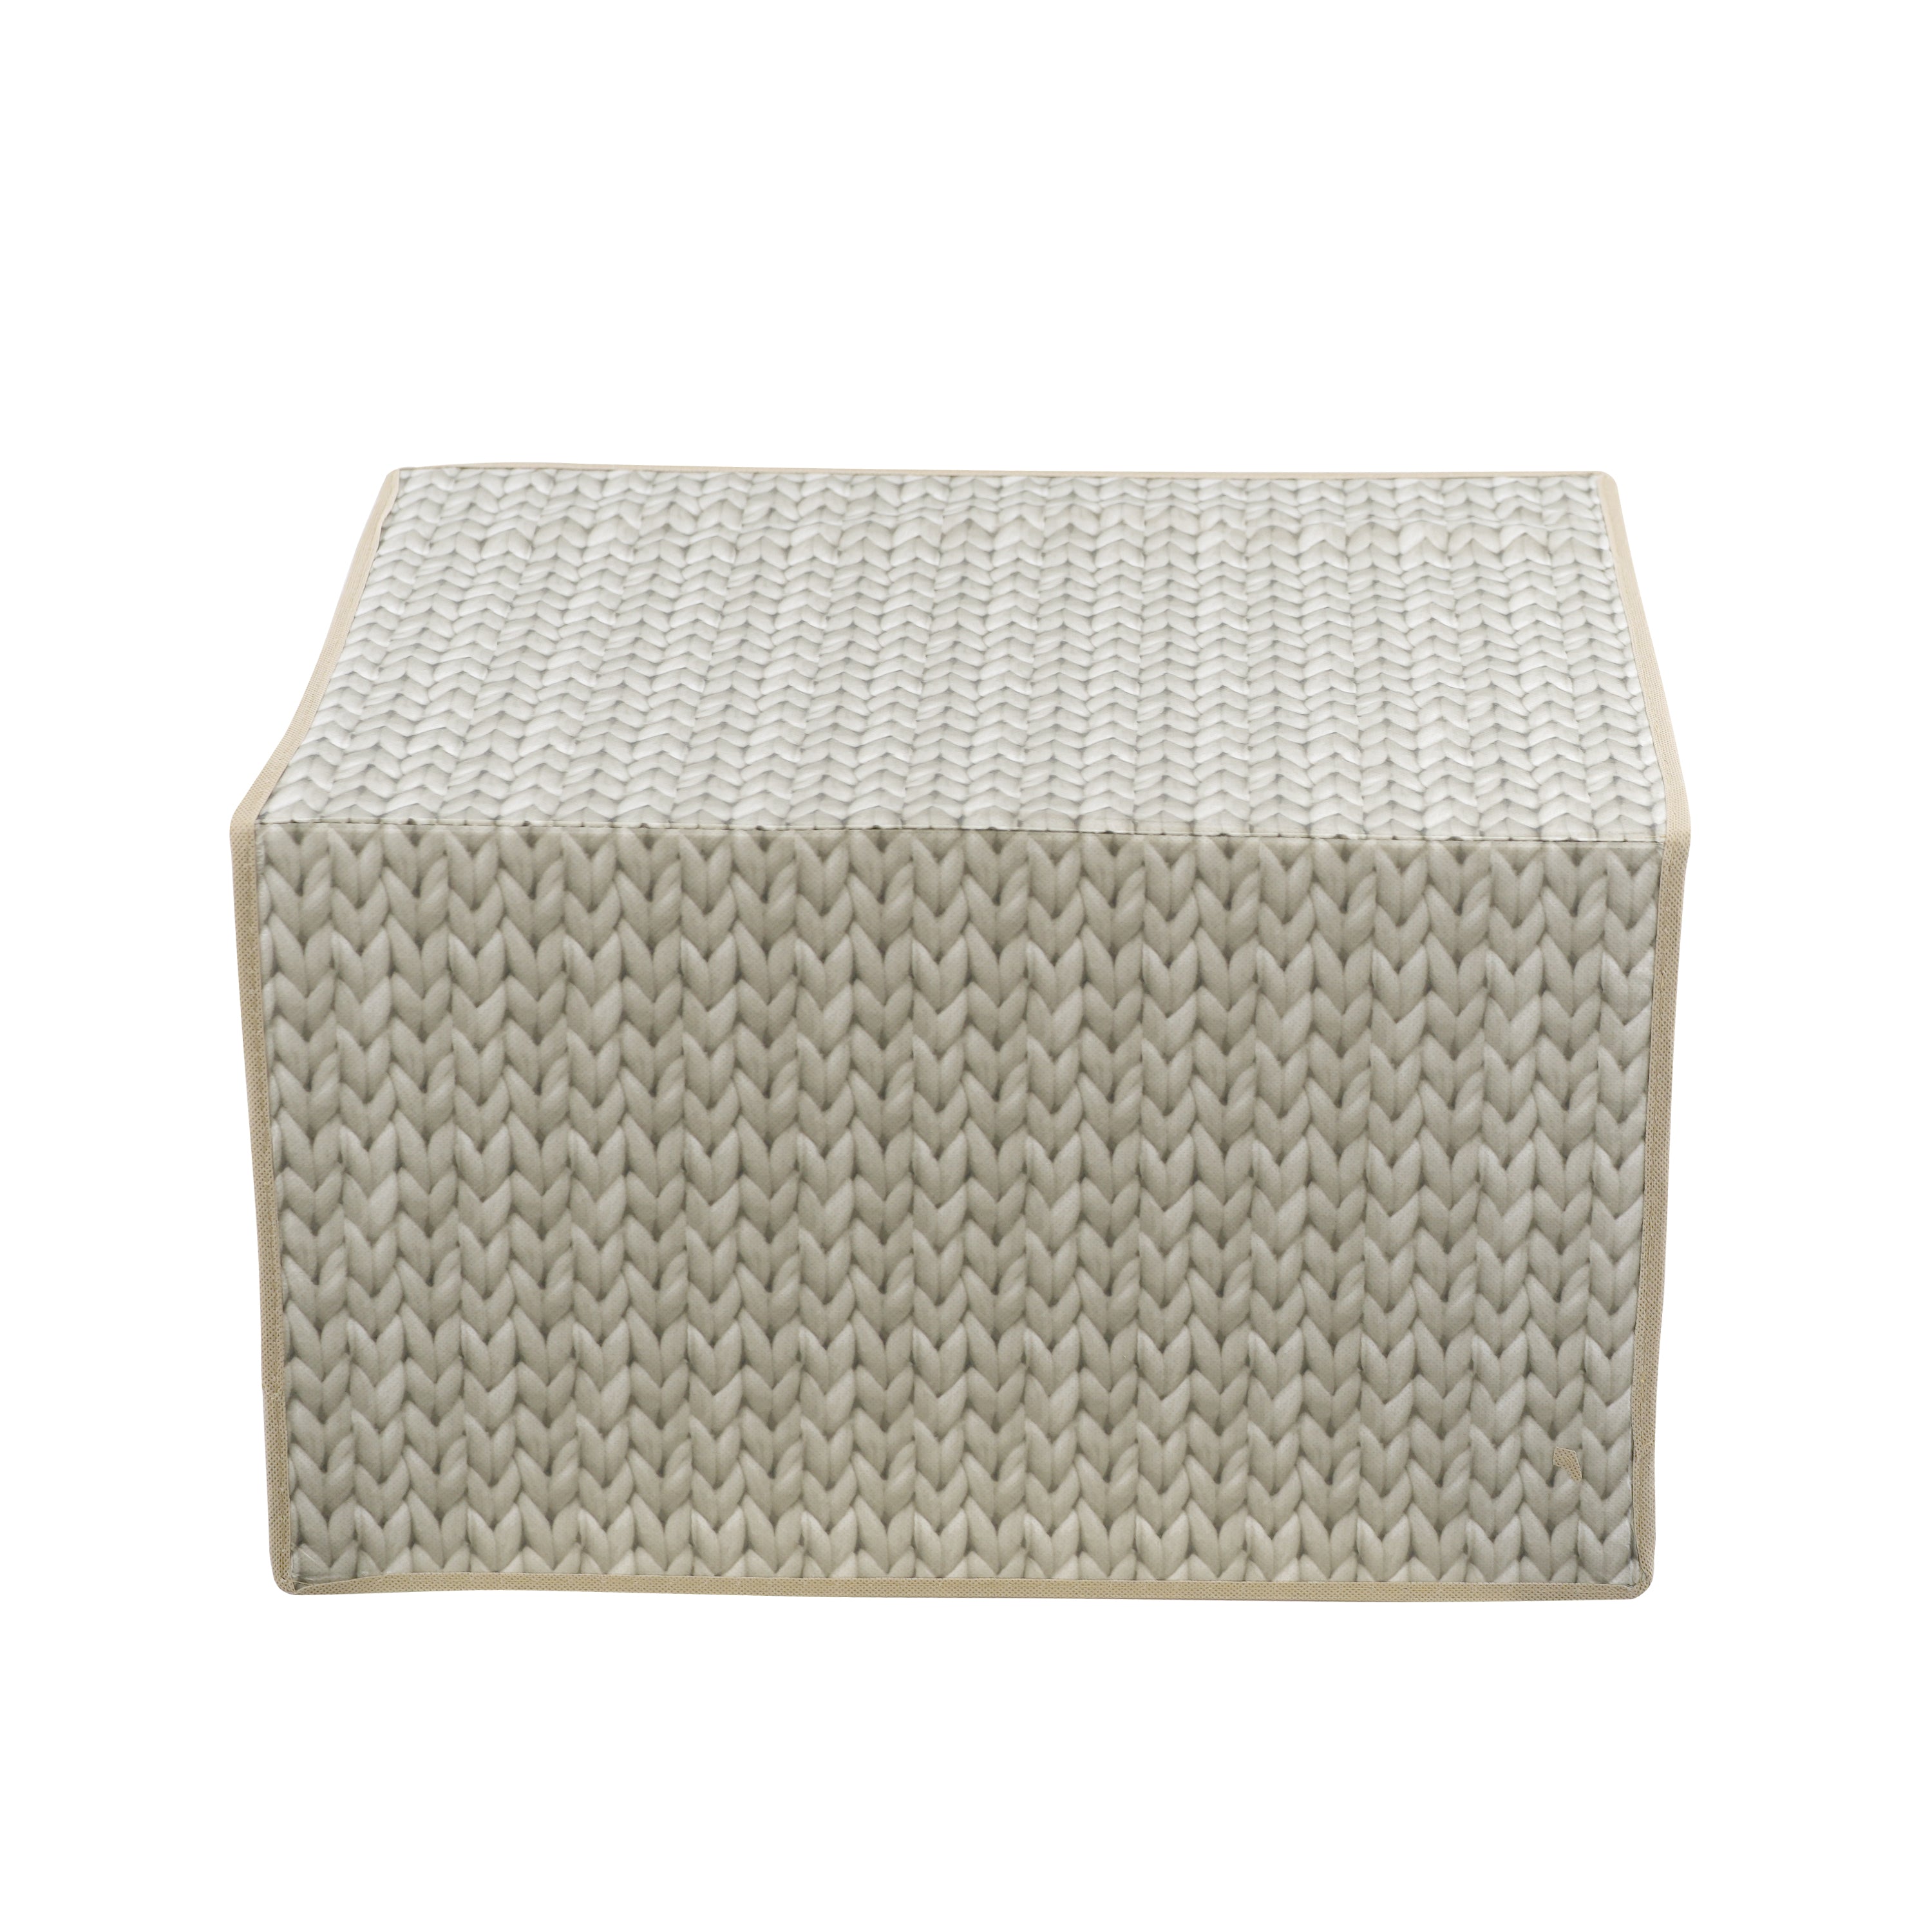 Knit Natural Large Storage Box GEEZY - The Magic Toy Shop